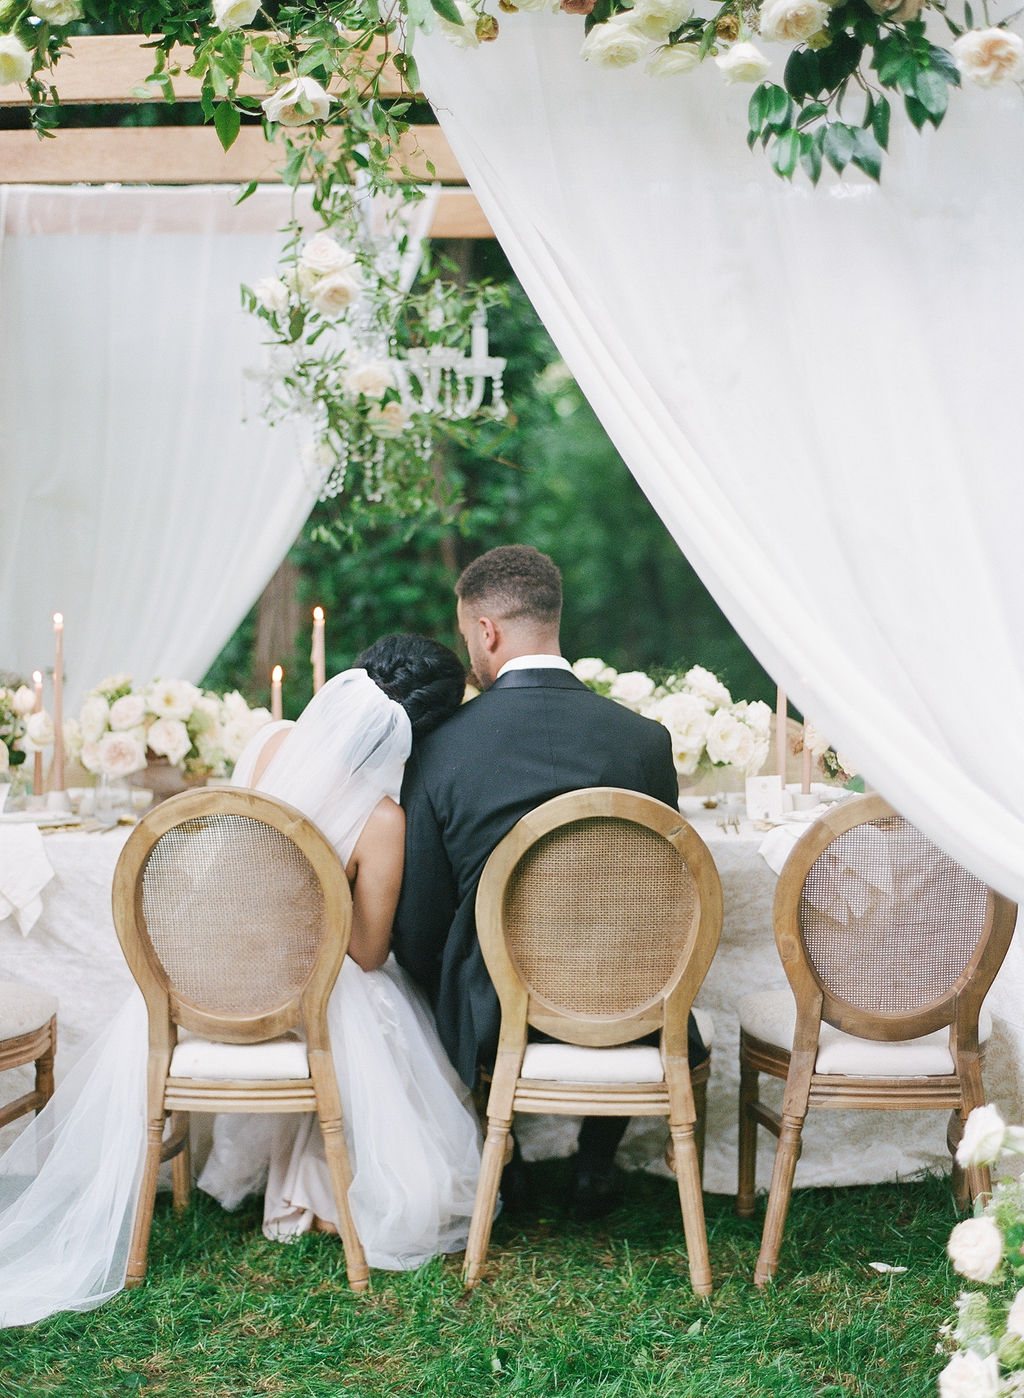 Elegant Microwedding Inspiration by Molly Carr Photography | Al Fresco Tented Dinner with Chandeliers & Flower Arch